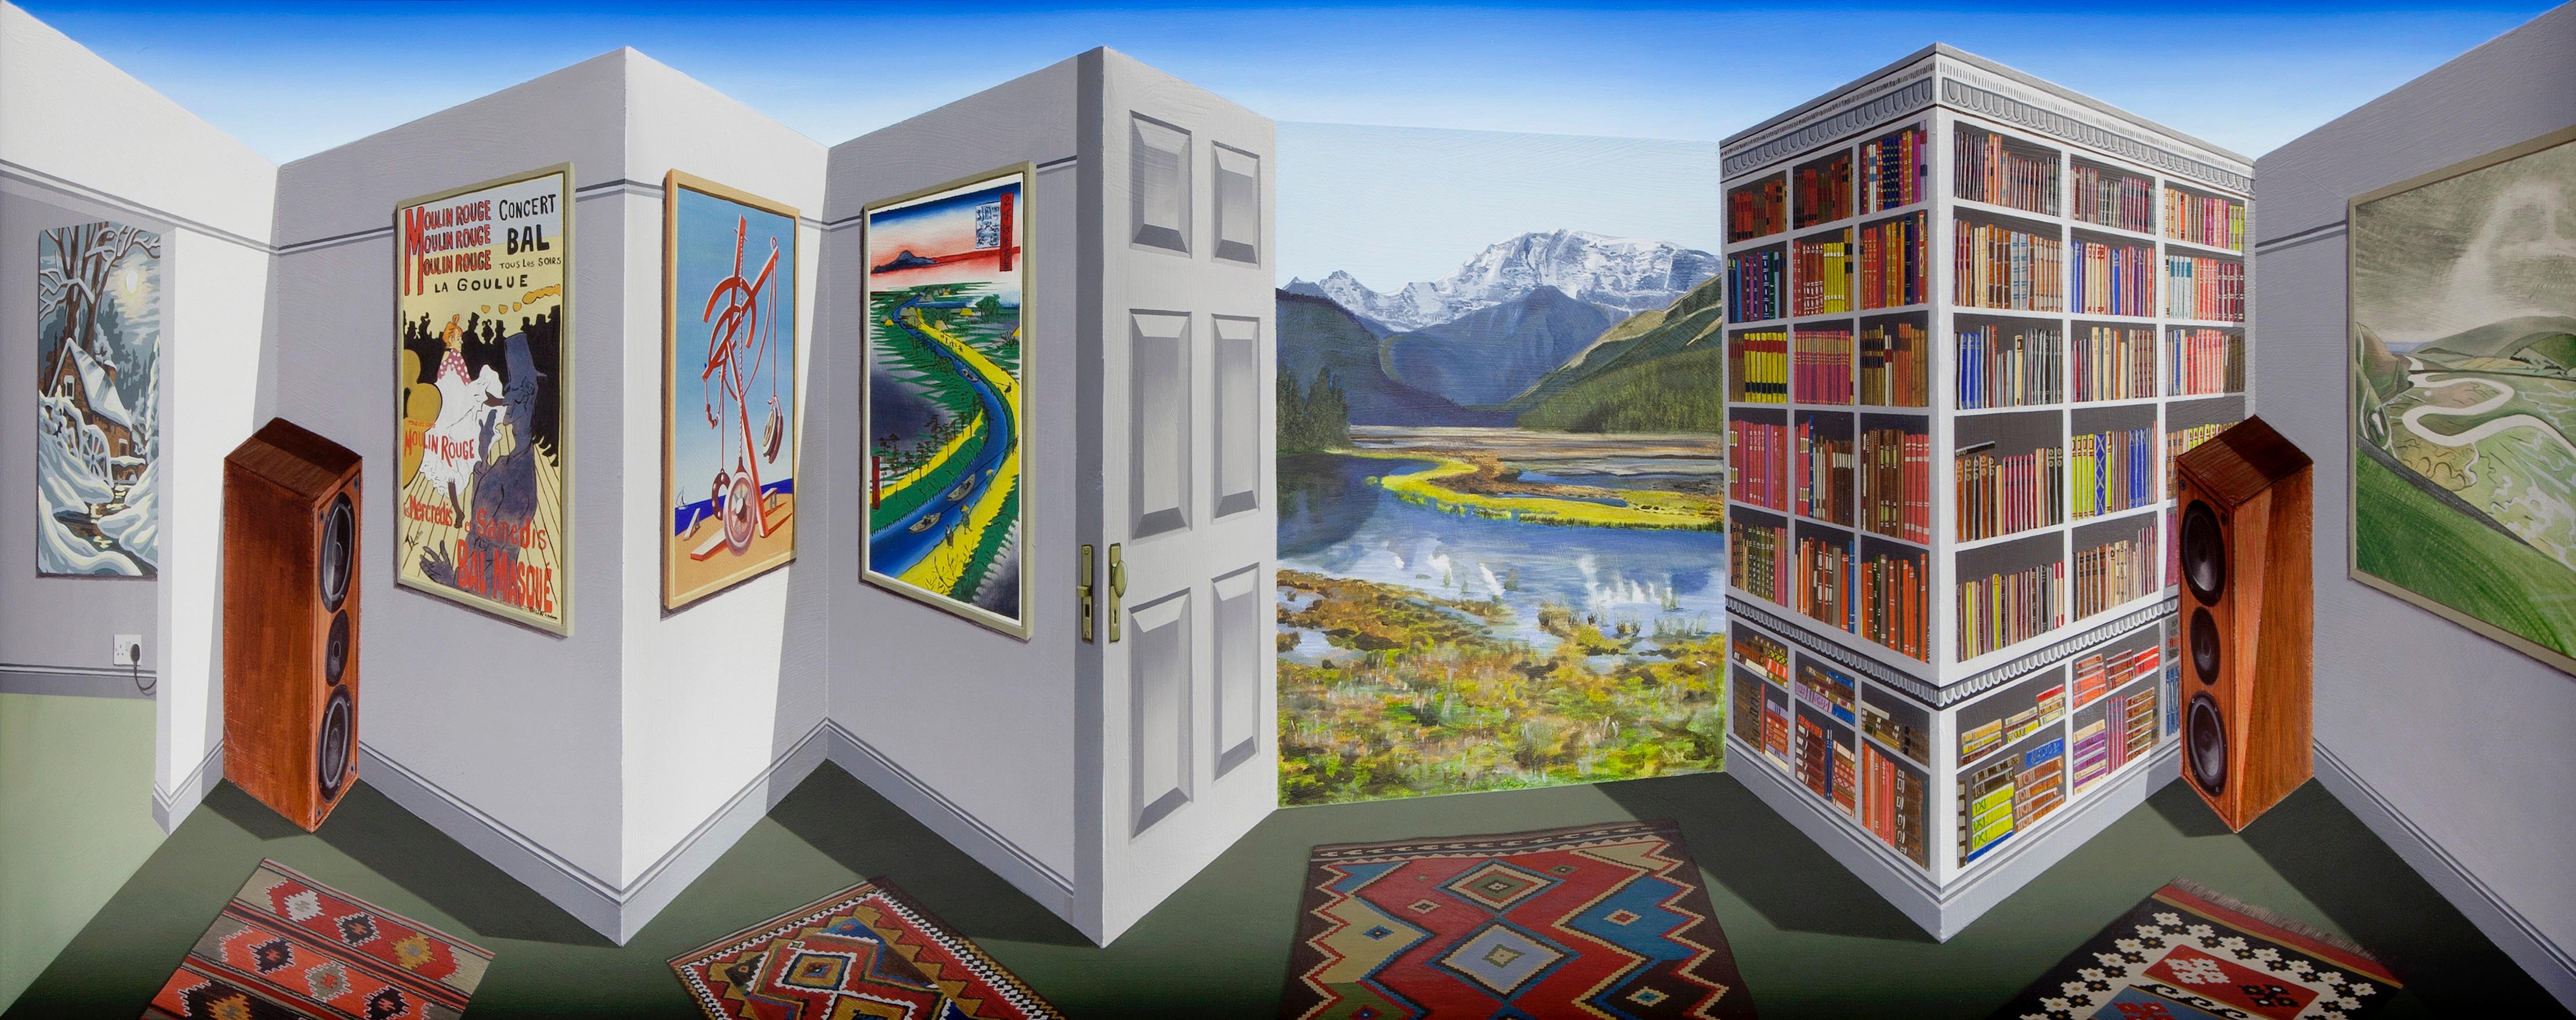 For the last 25 years Patrick Hughes, contemporary artist, and his 3-D reverspective paintings have been "hughesually" in demand, exhibited around the world, and featured in many public collections. The experience of seeing a Patrick Hughes